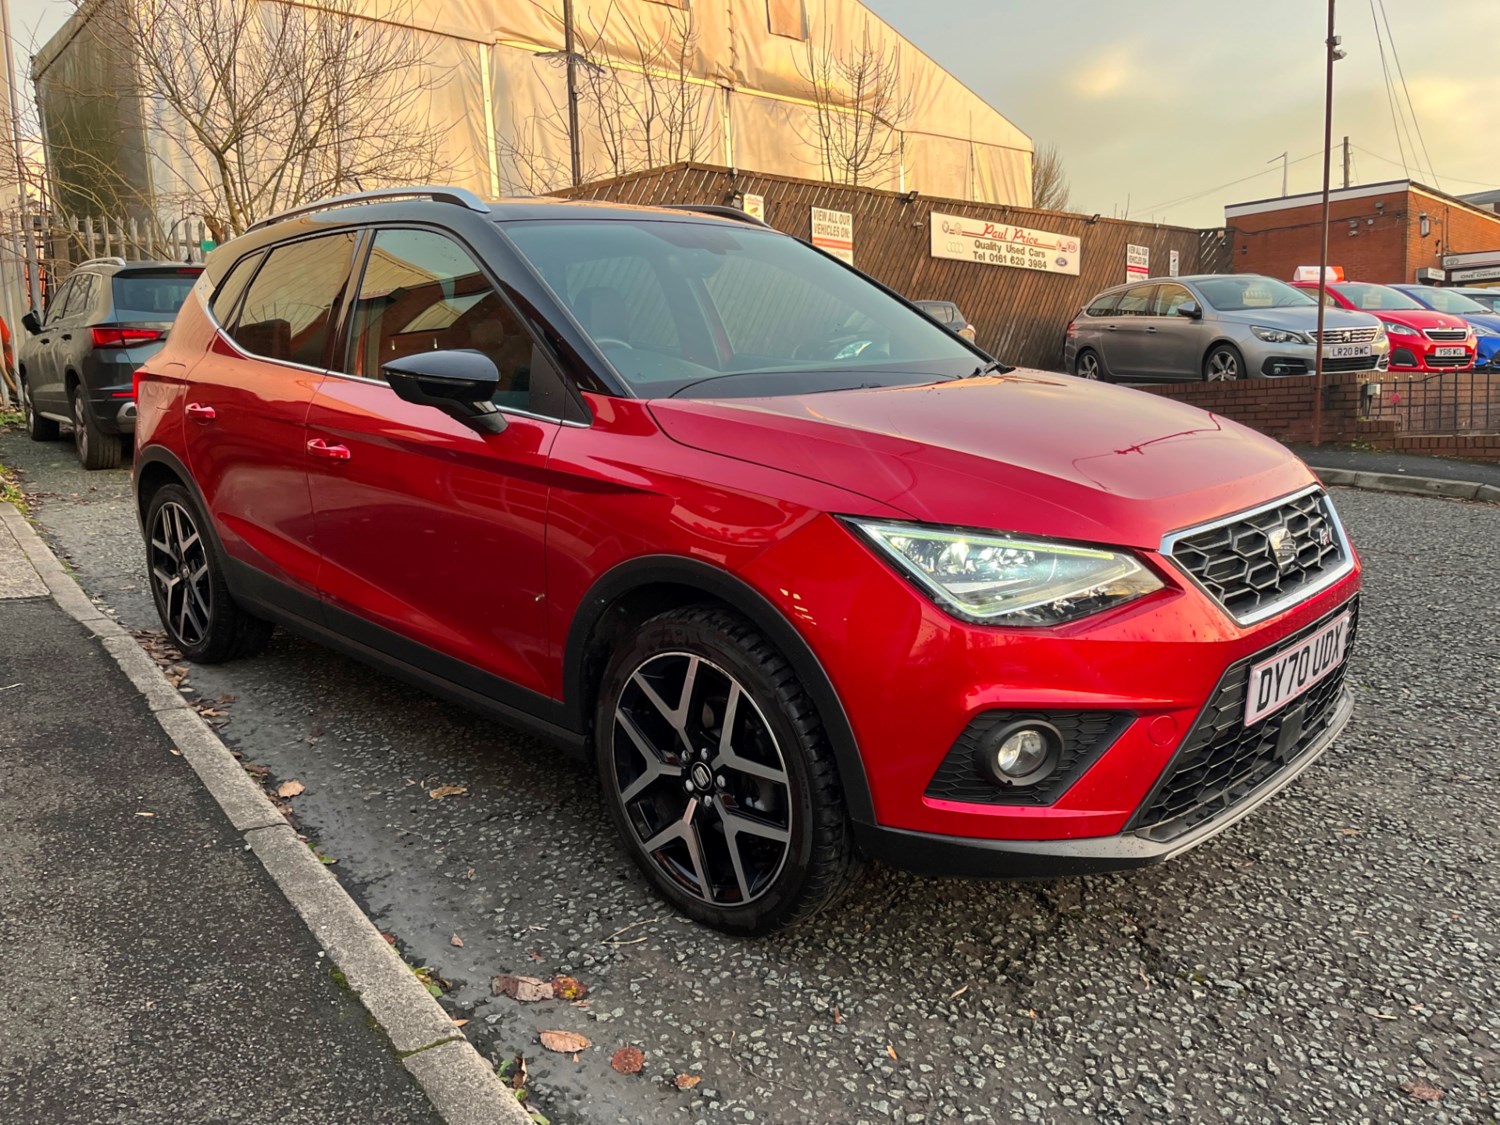 Used SEAT Arona 1.0 TSI 110 FR Sport [EZ] 5dr 5 Doors HATCHBACK for sale in  Oldham, Lancashire - Paul Price Cars Oldham